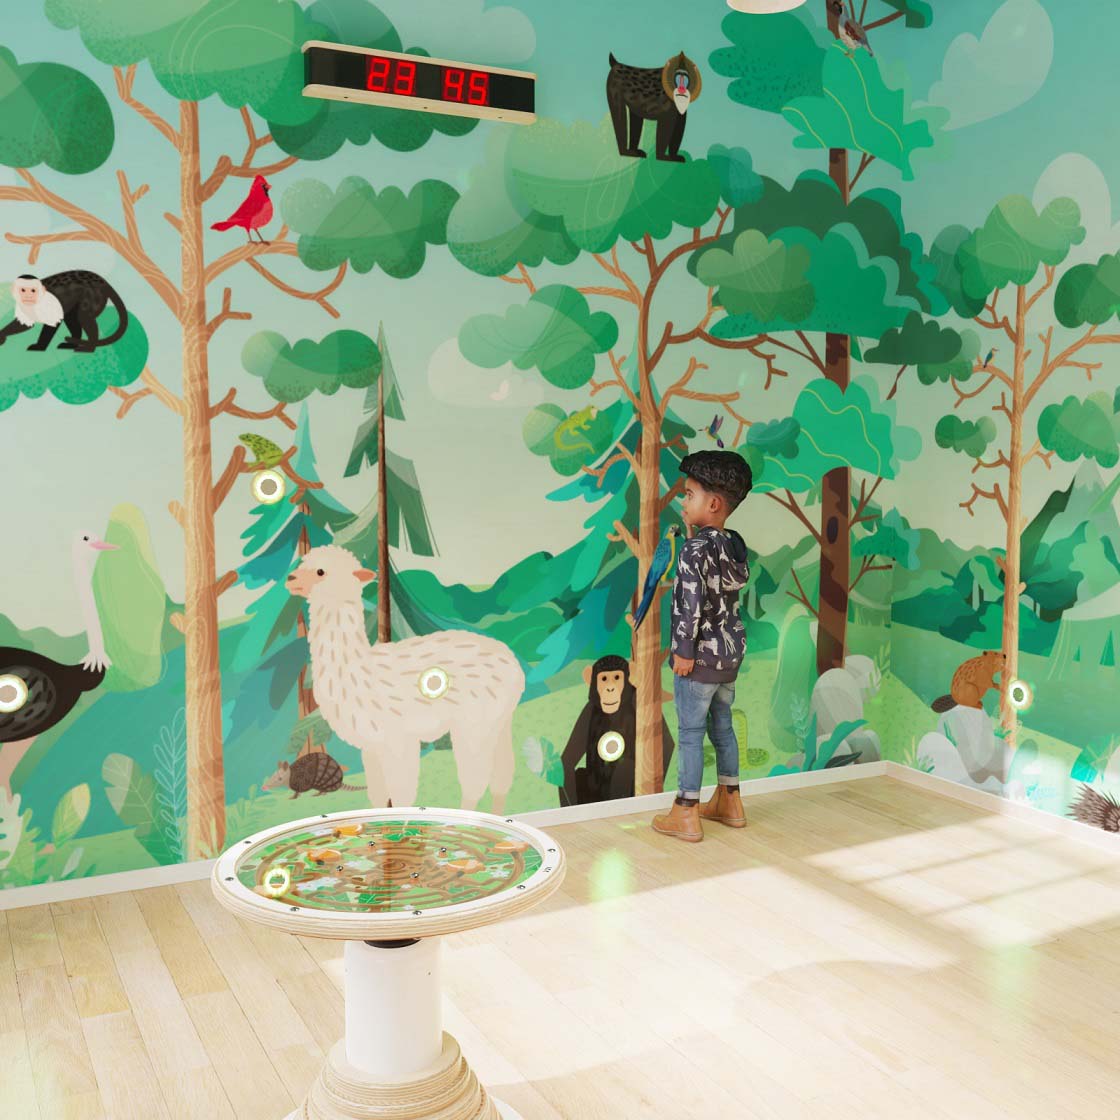 A unique play experience in your kids' corner with the experience wall